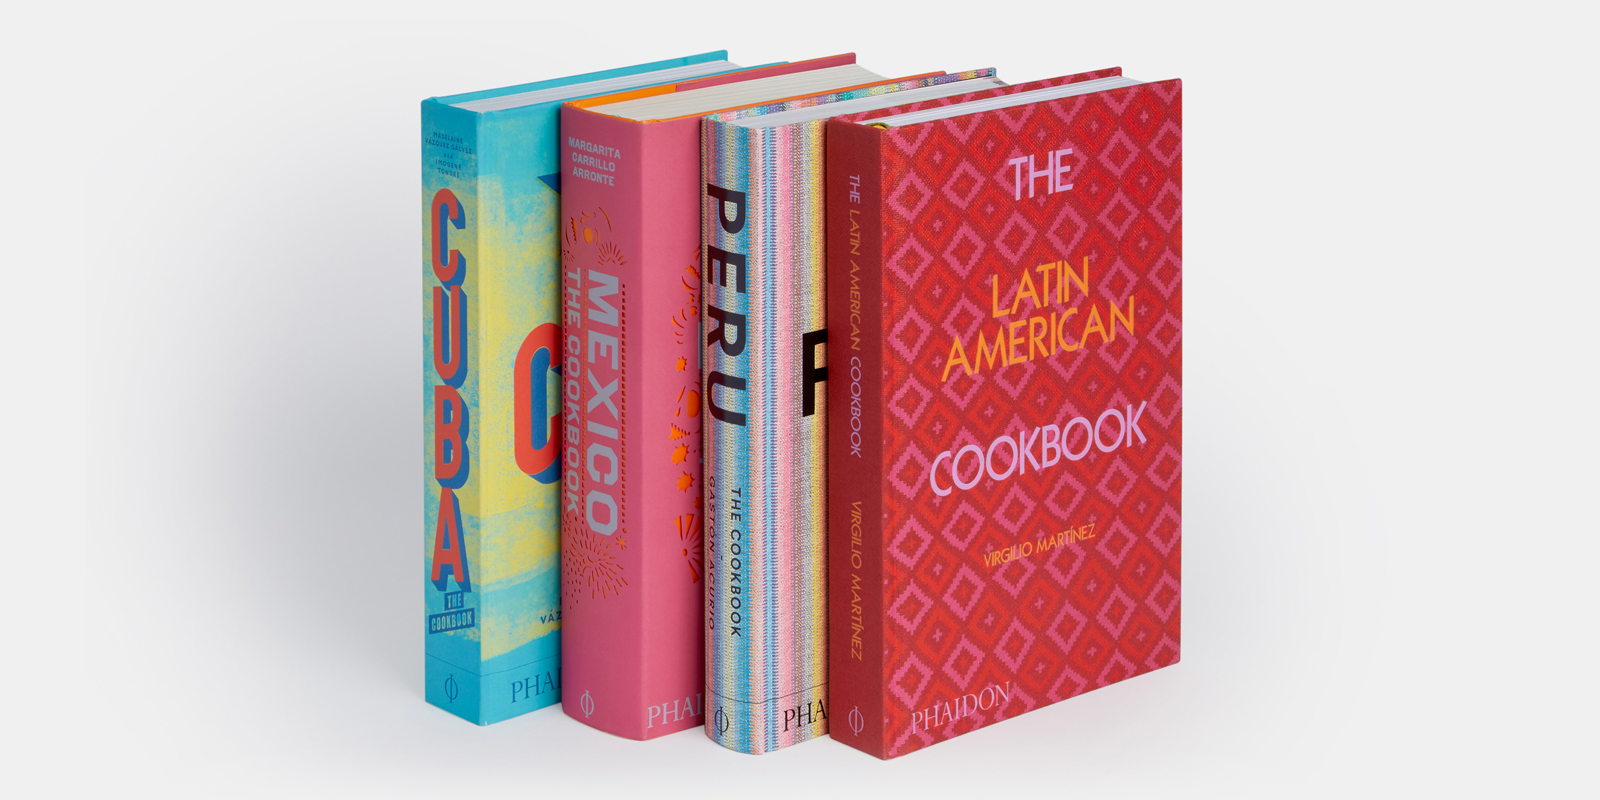 The Latin American Home Cooking Collection